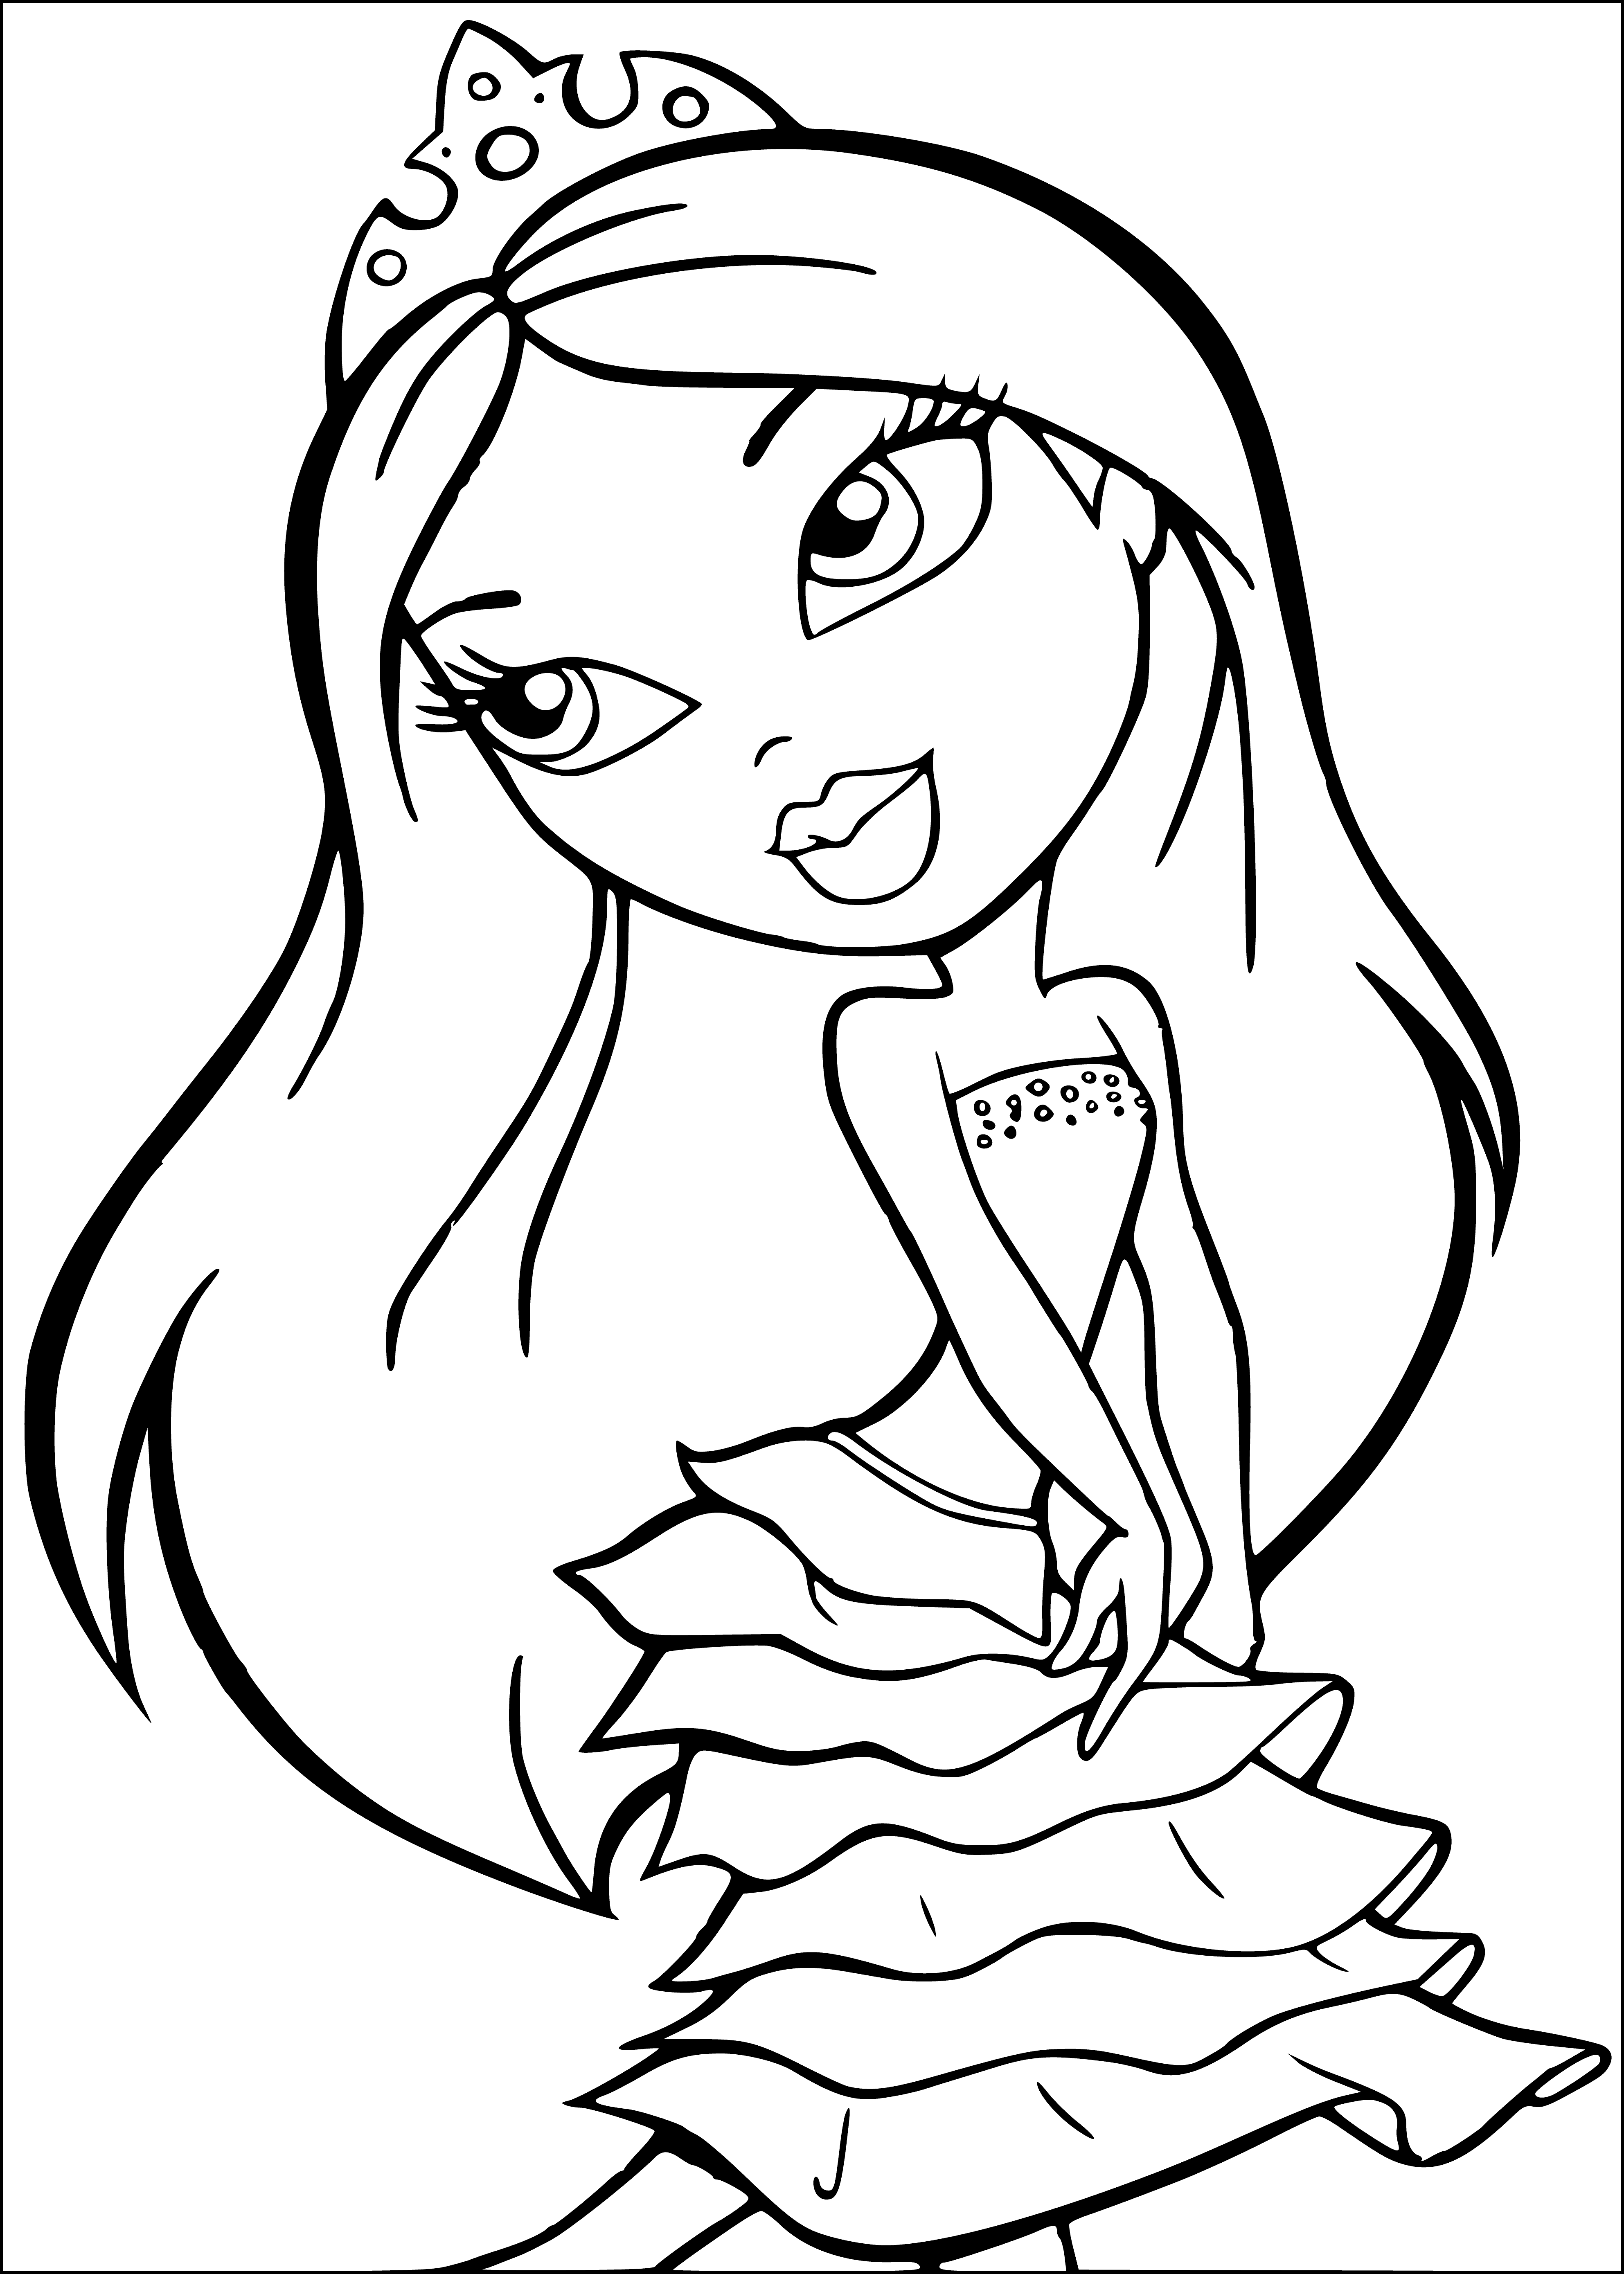 coloring page: Bratz are trendsetting teenage girls with big heads, faces and accessories. They are the queens of fashion. #Fashion #Style